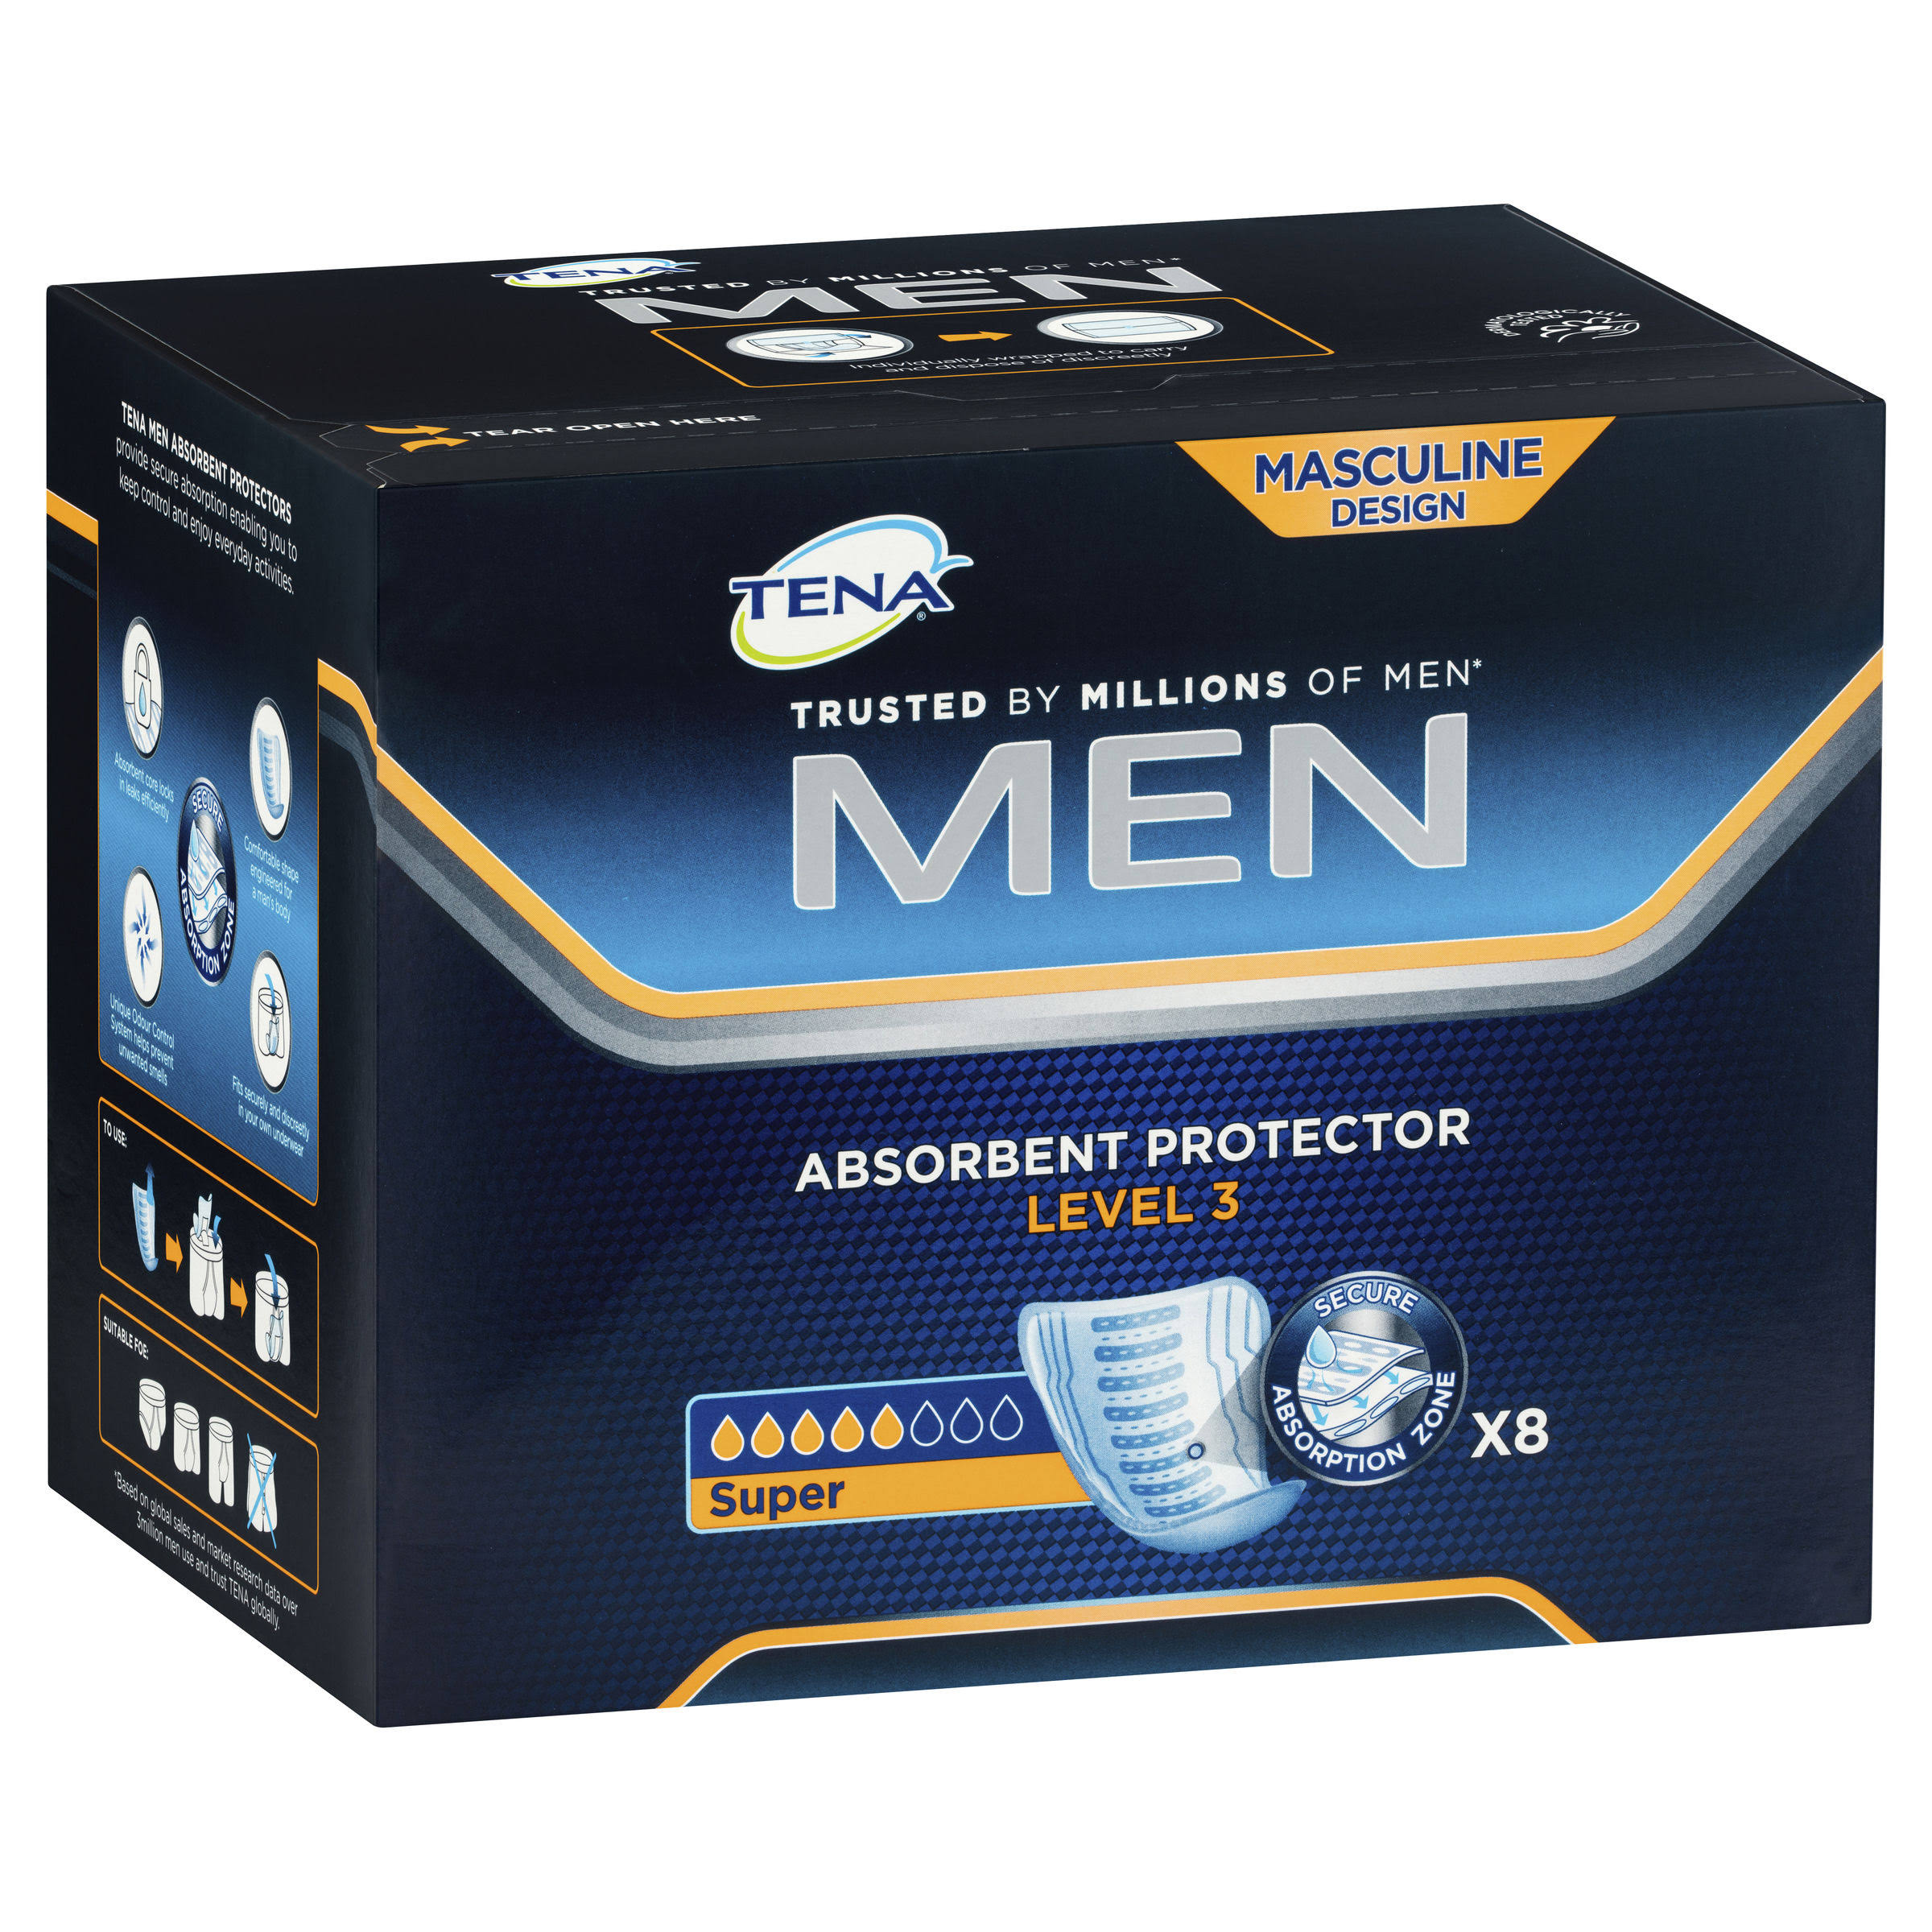 Tena Men Absorbent Protector Level 3 Pads - Pack of 8